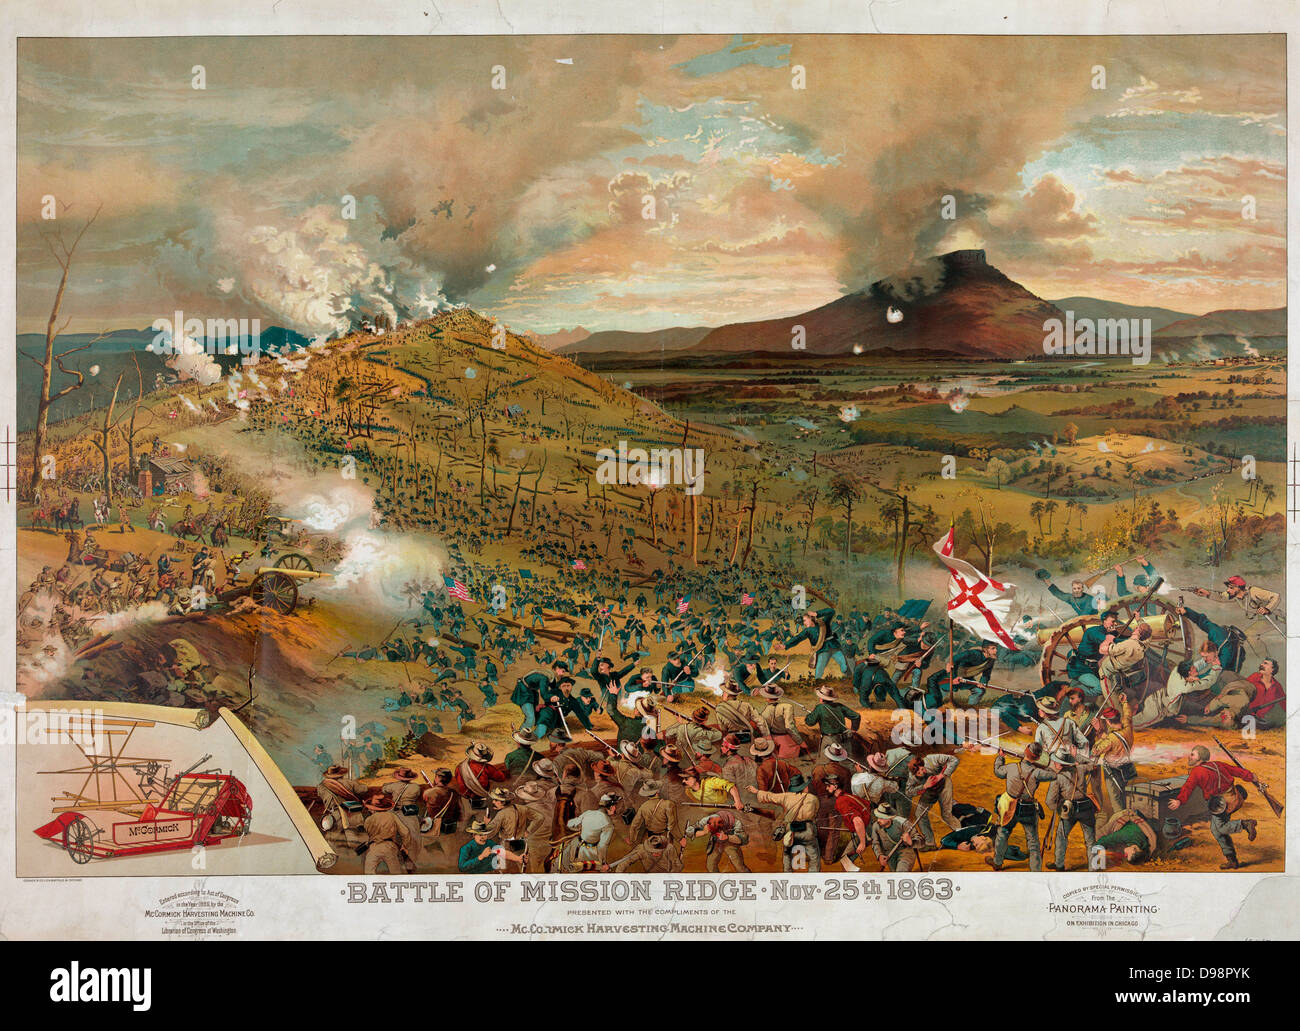 American Civil War 1861-1865. Chattanooga Campaign: Battle of Missionary Ridge, 25 November 1863. Union forces under Grant defeated Confederate army under Bragg. Print sponsered by McCormick Harvesting Co., 1886. Stock Photo